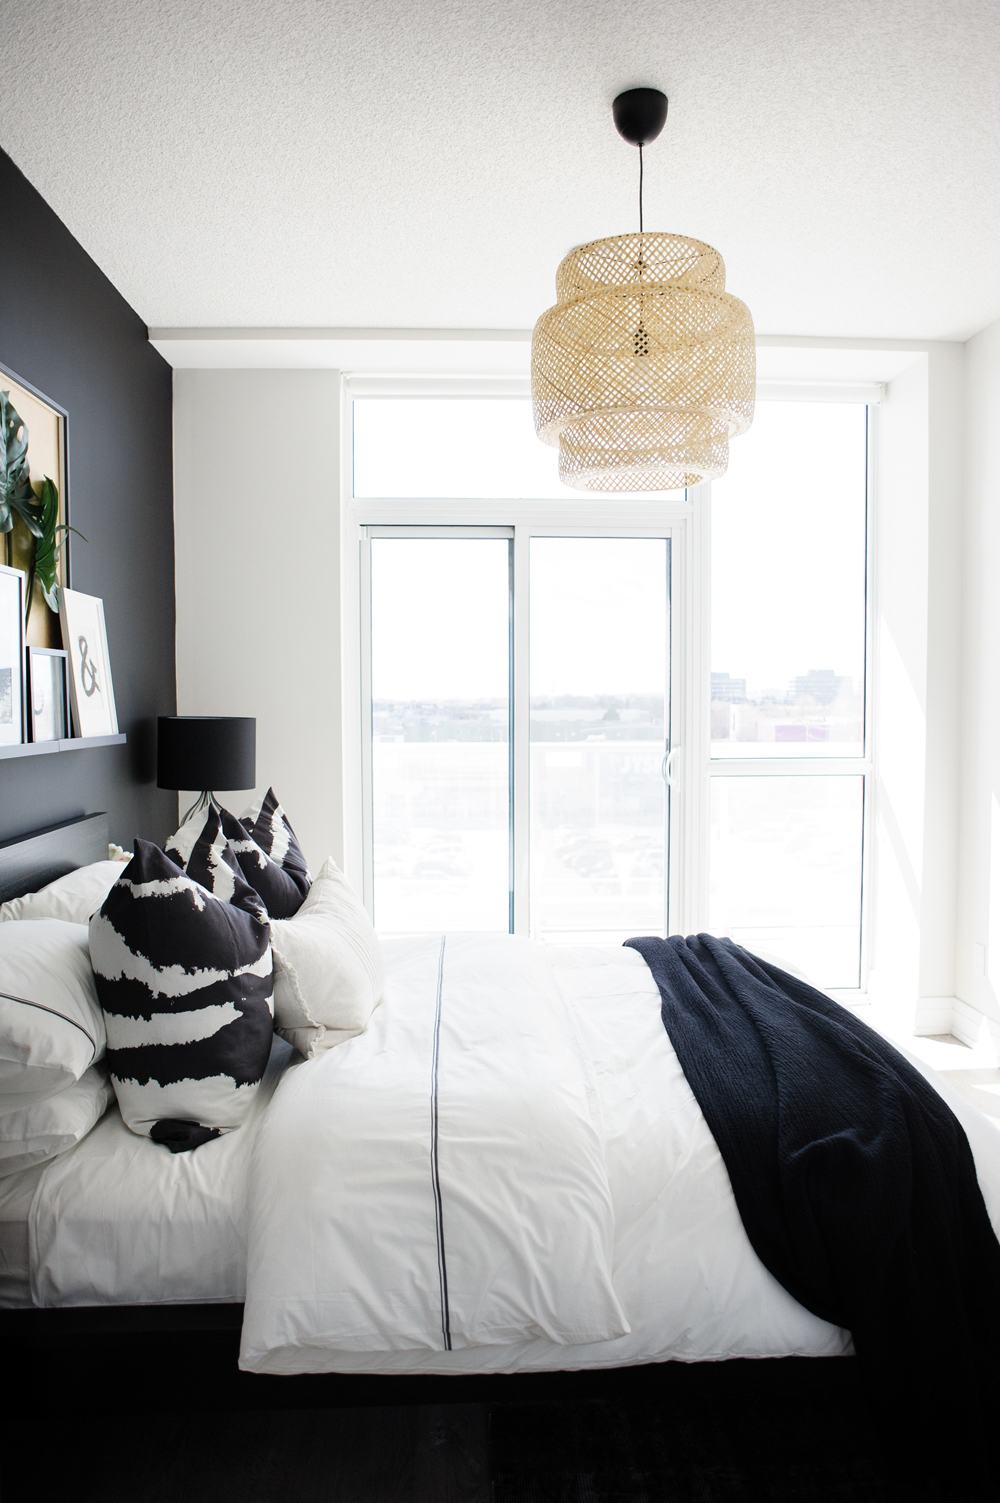 White bedding with black and white pillows and throws